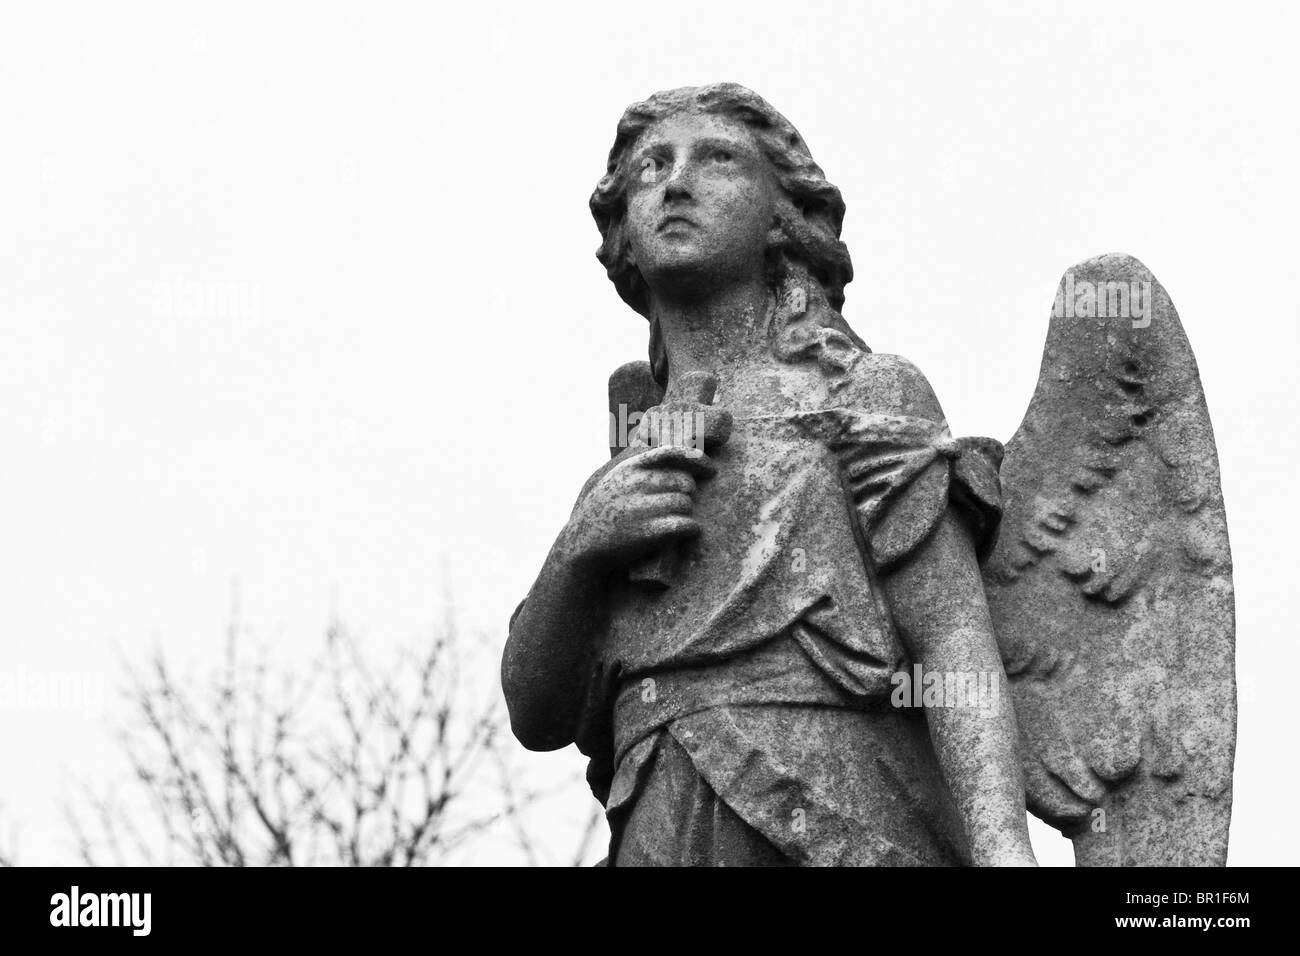 Angel statue Black and White Stock Photos & Images - Alamy